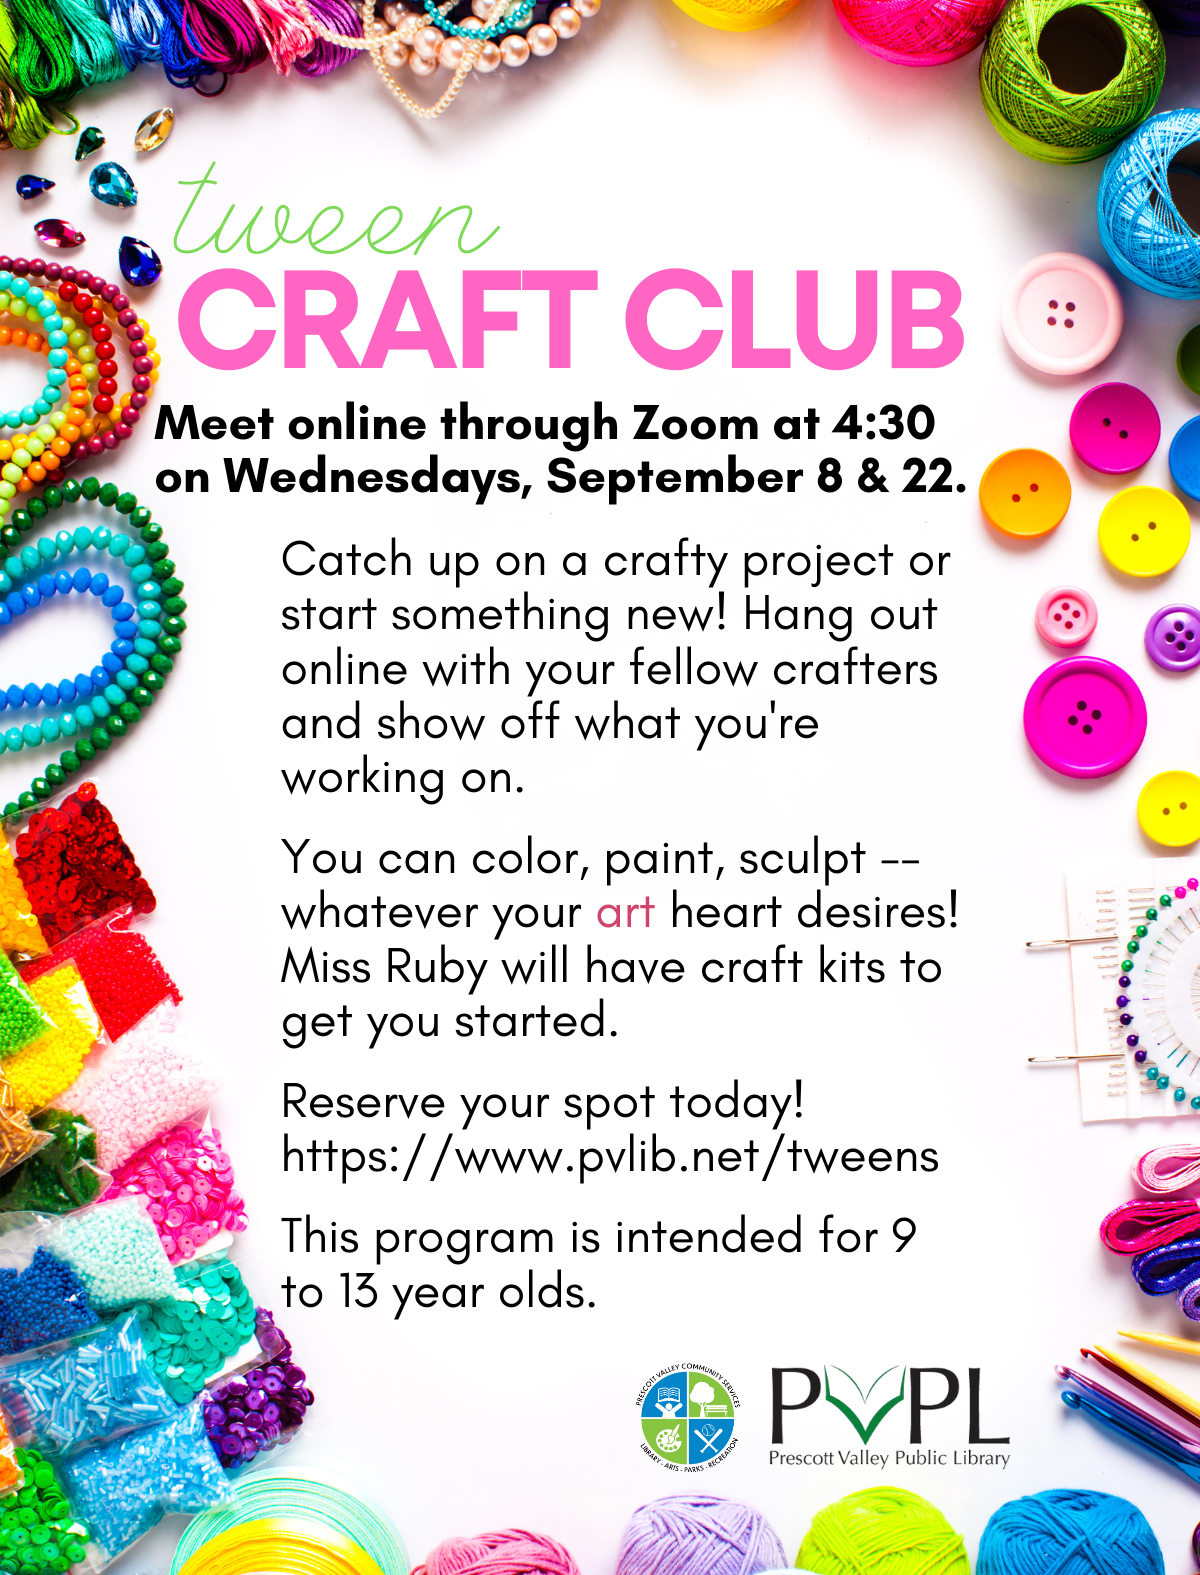 Tween Craft Club meets online on Sept 8 and 22 @ 4:30pm -- Miss Ruby has craft kits for you to pick up to get you started!